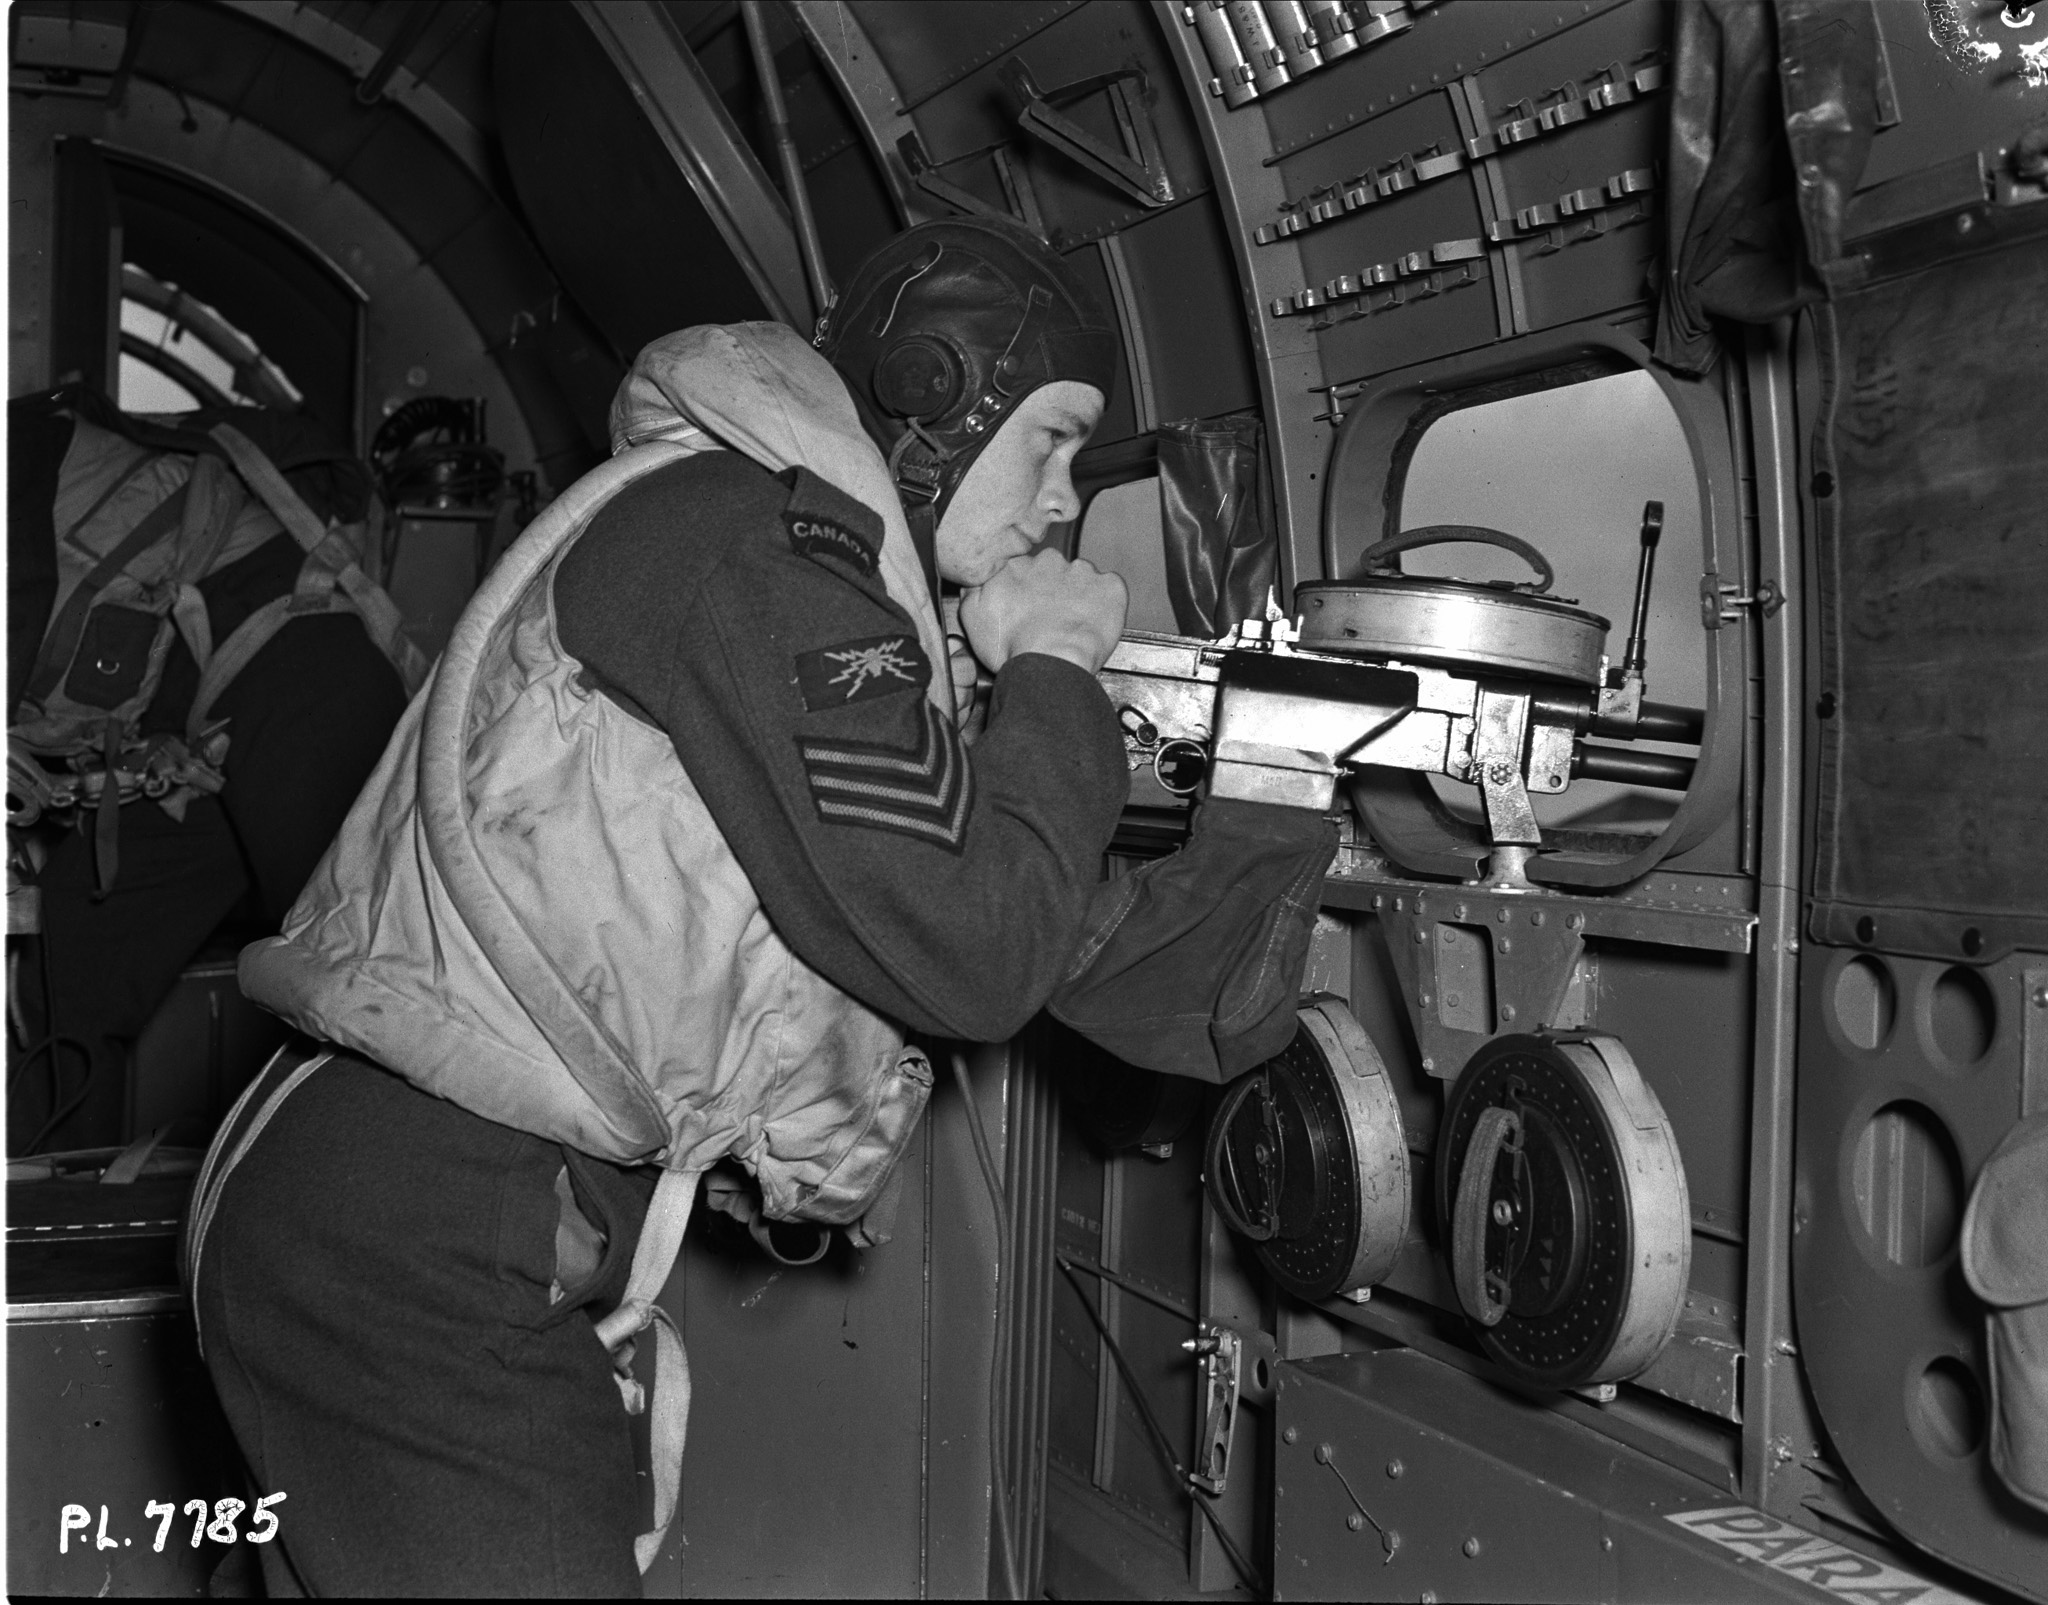 Sergeant R. S. Sandelin, of Cornwall, Ontario, is an air gunner with the RCAF’s “Demon Squadron”, part of Coastal Command. He joined the Air Force as soon as he left school. PHOTO: DND Archives, PL-7785